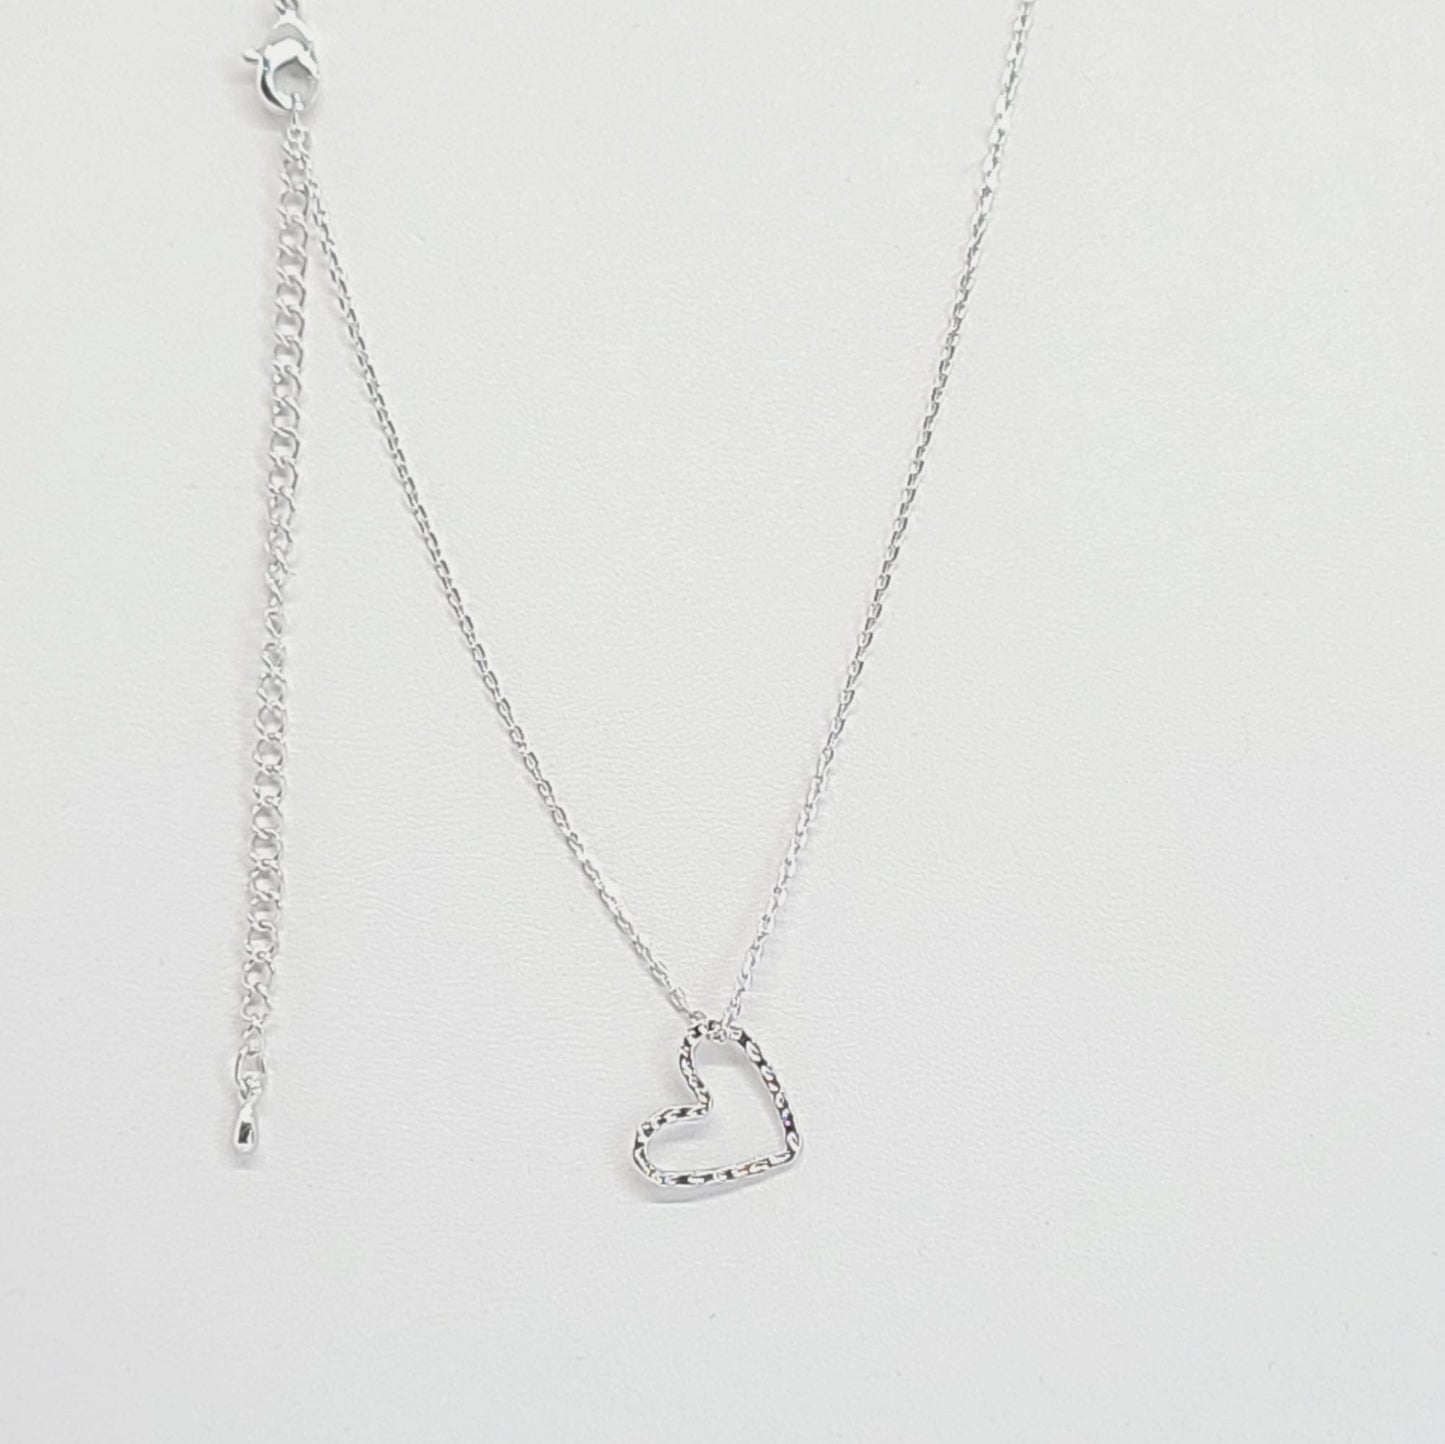 Language of the Heart Necklace by Recovery Matters Silver (Rhodium)